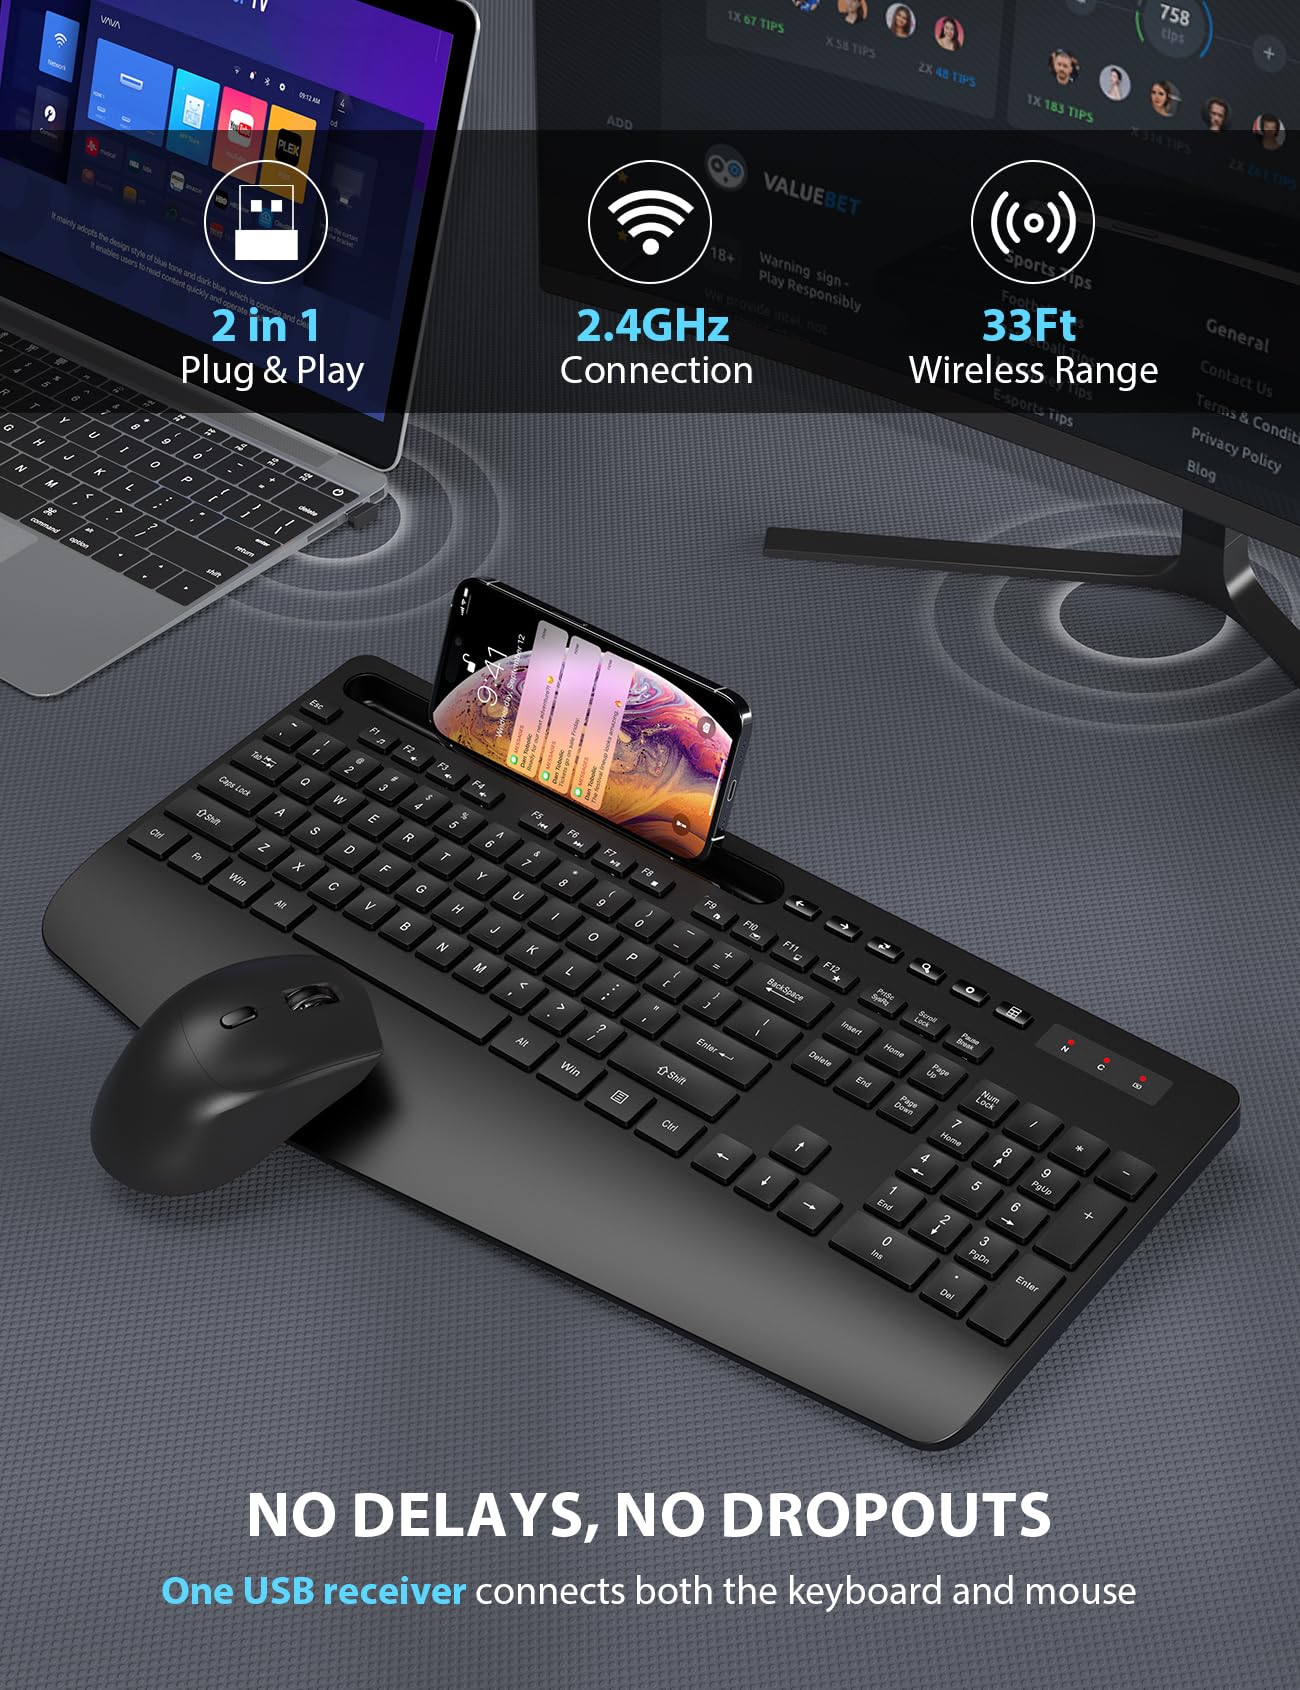 Wireless Keyboard and Mouse Combo - Full-Sized Ergonomic Keyboard with Wrist Rest, Phone Holder, Sleep Mode, Silent 2.4GHz Cordless Keyboard Mouse Combo for Computer, Laptop, PC, Mac, Windows -Trueque